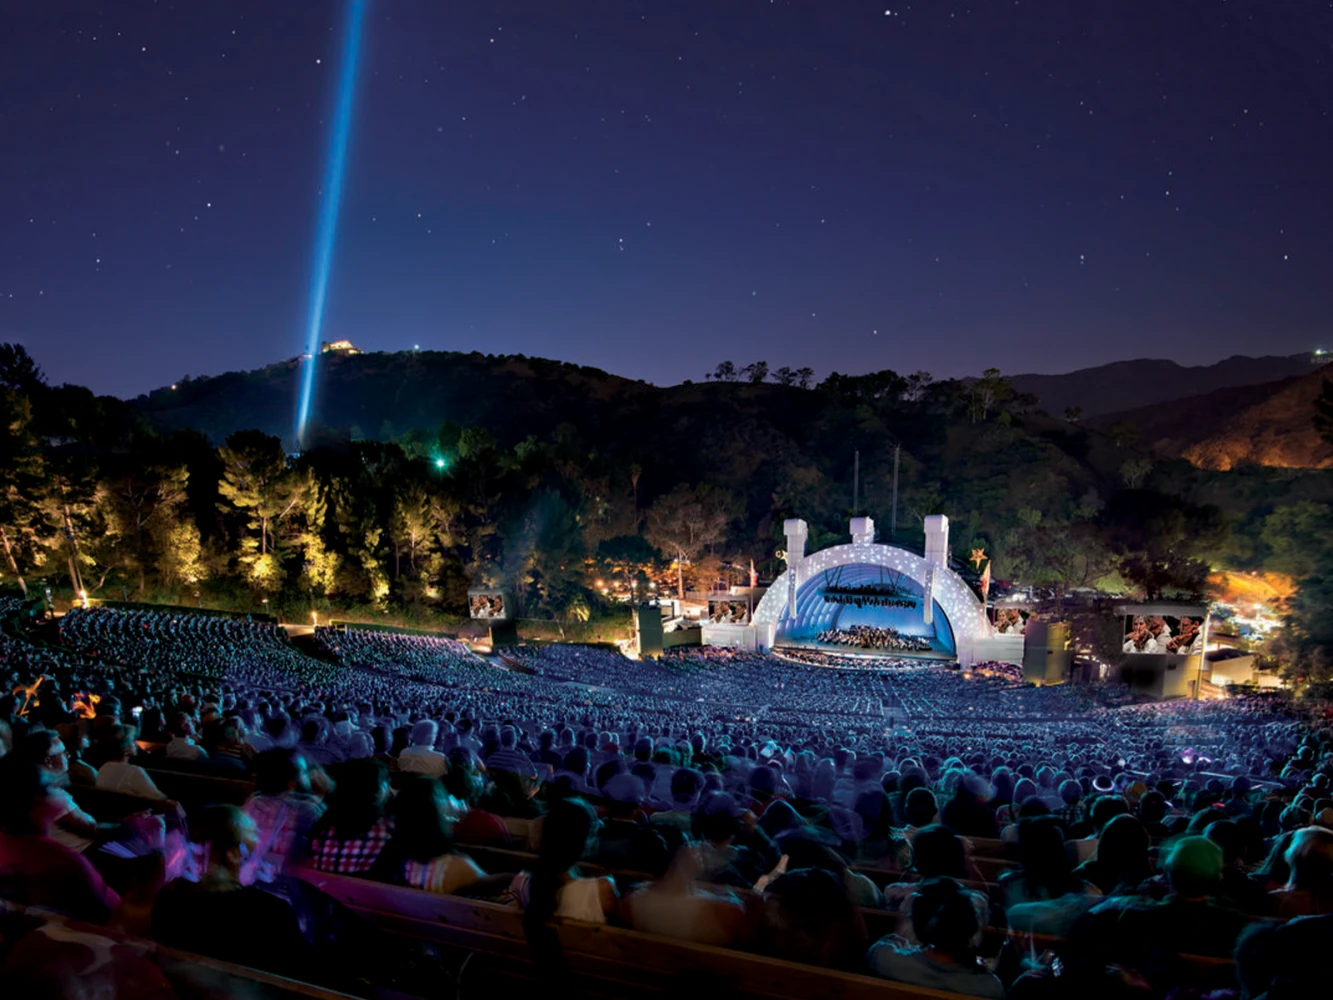 Chaka Khan with the Hollywood Bowl Orchestra: What to expect - 2